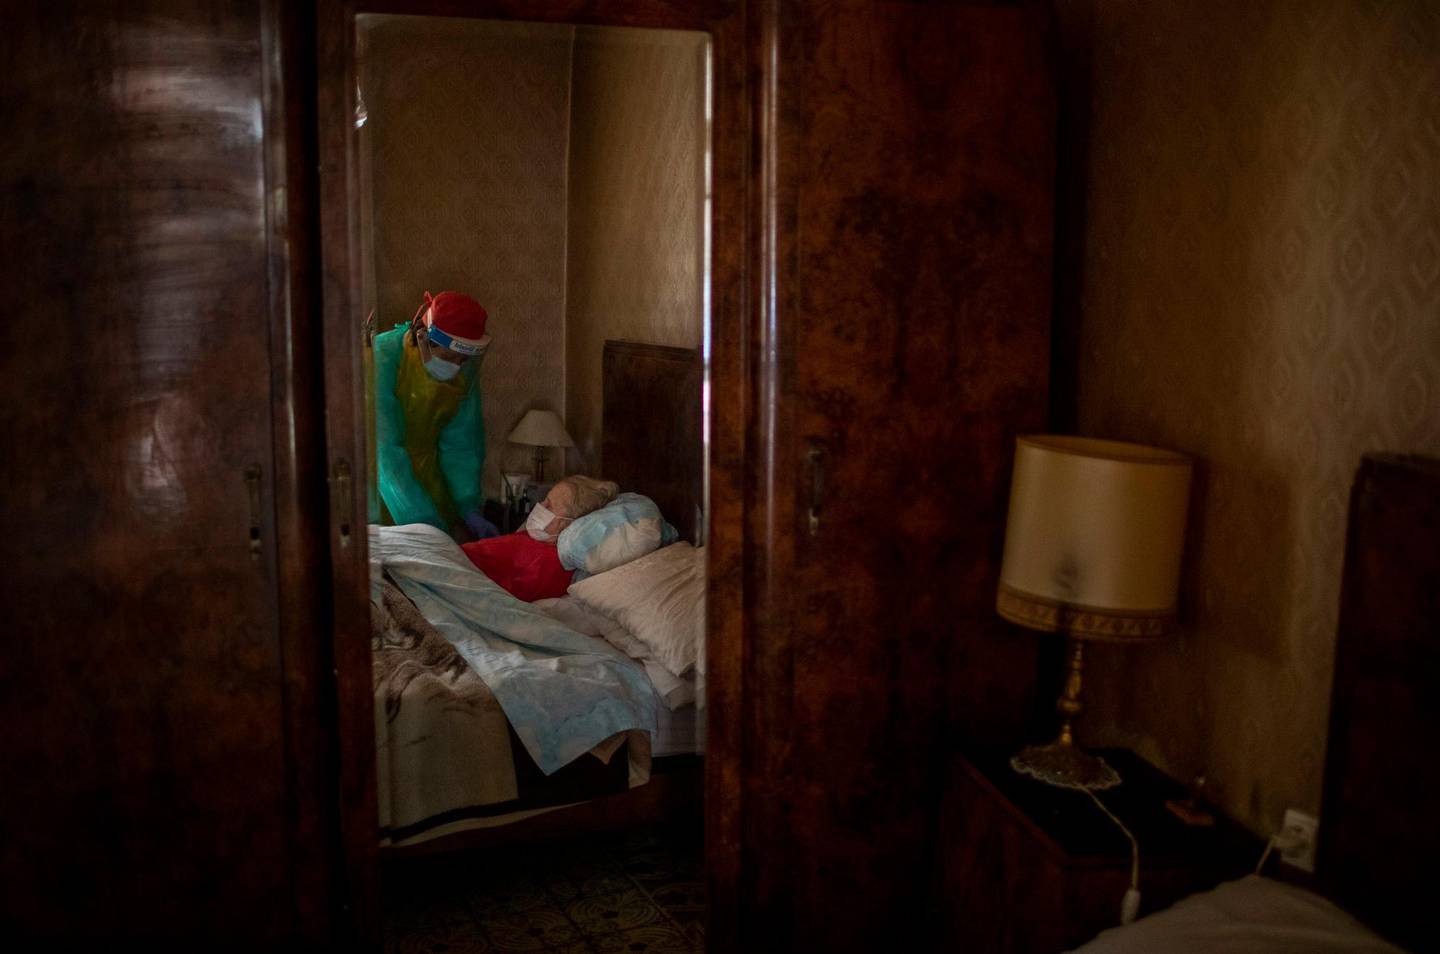 Josefa Ribas, 86, who is bedridden and suffers from dementia, is attended to by nurse Laura Valdes during a home care visit in Barcelona, Spain, on April 7, 2020. Ribas' husband, Jose Marcos, fears what will happen if the coronavirus enters their home and infects them. "I survived the post-war period (of mass hunger). I hope I survive this pandemic," he said. (AP Photo/Emilio Morenatti)